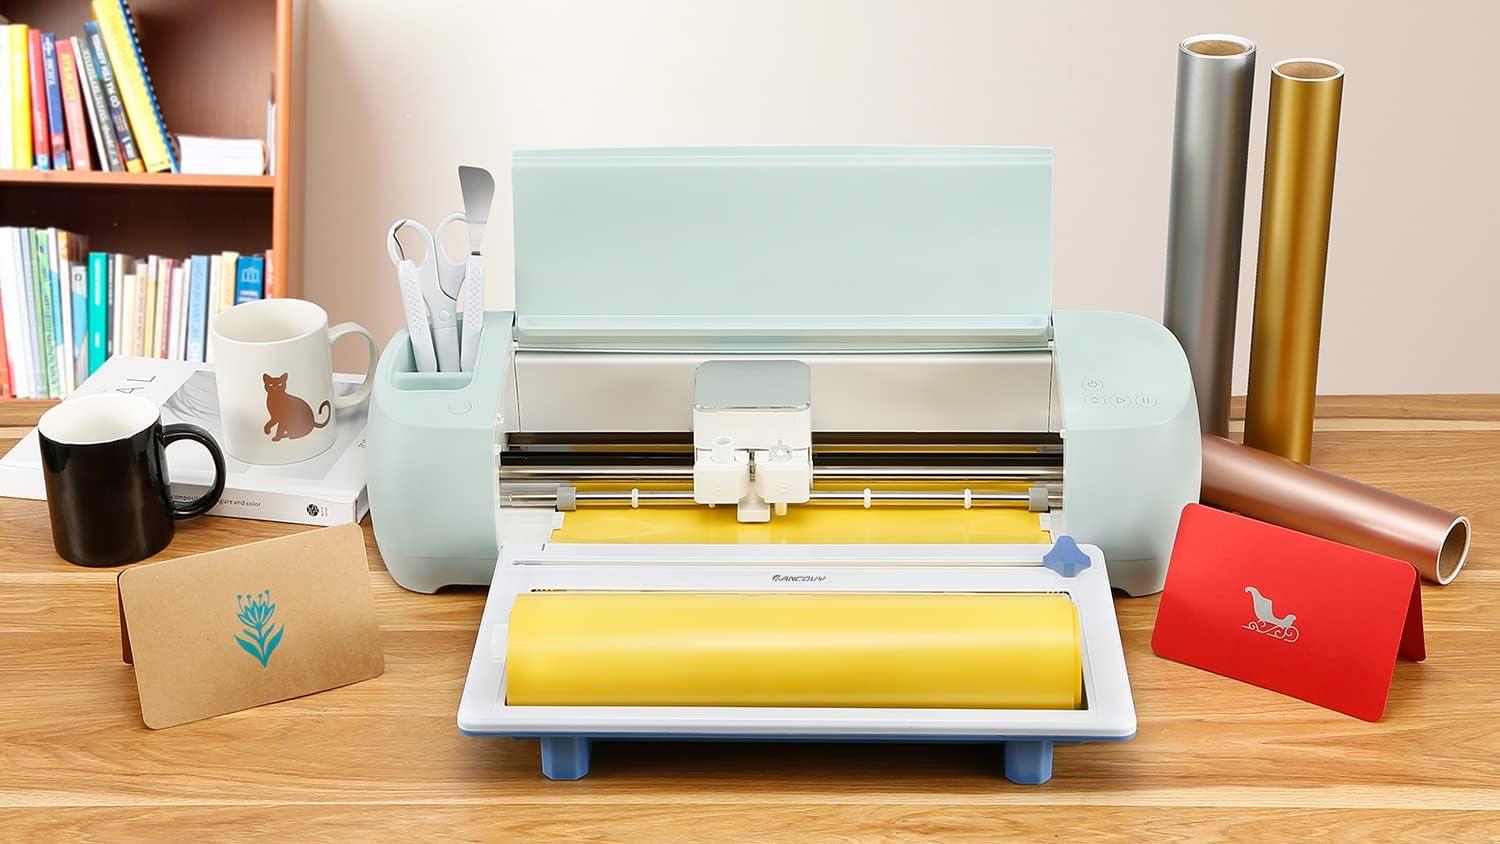  AIRCUT Vinyl Roll Holder with Trimmer for Cricut Maker